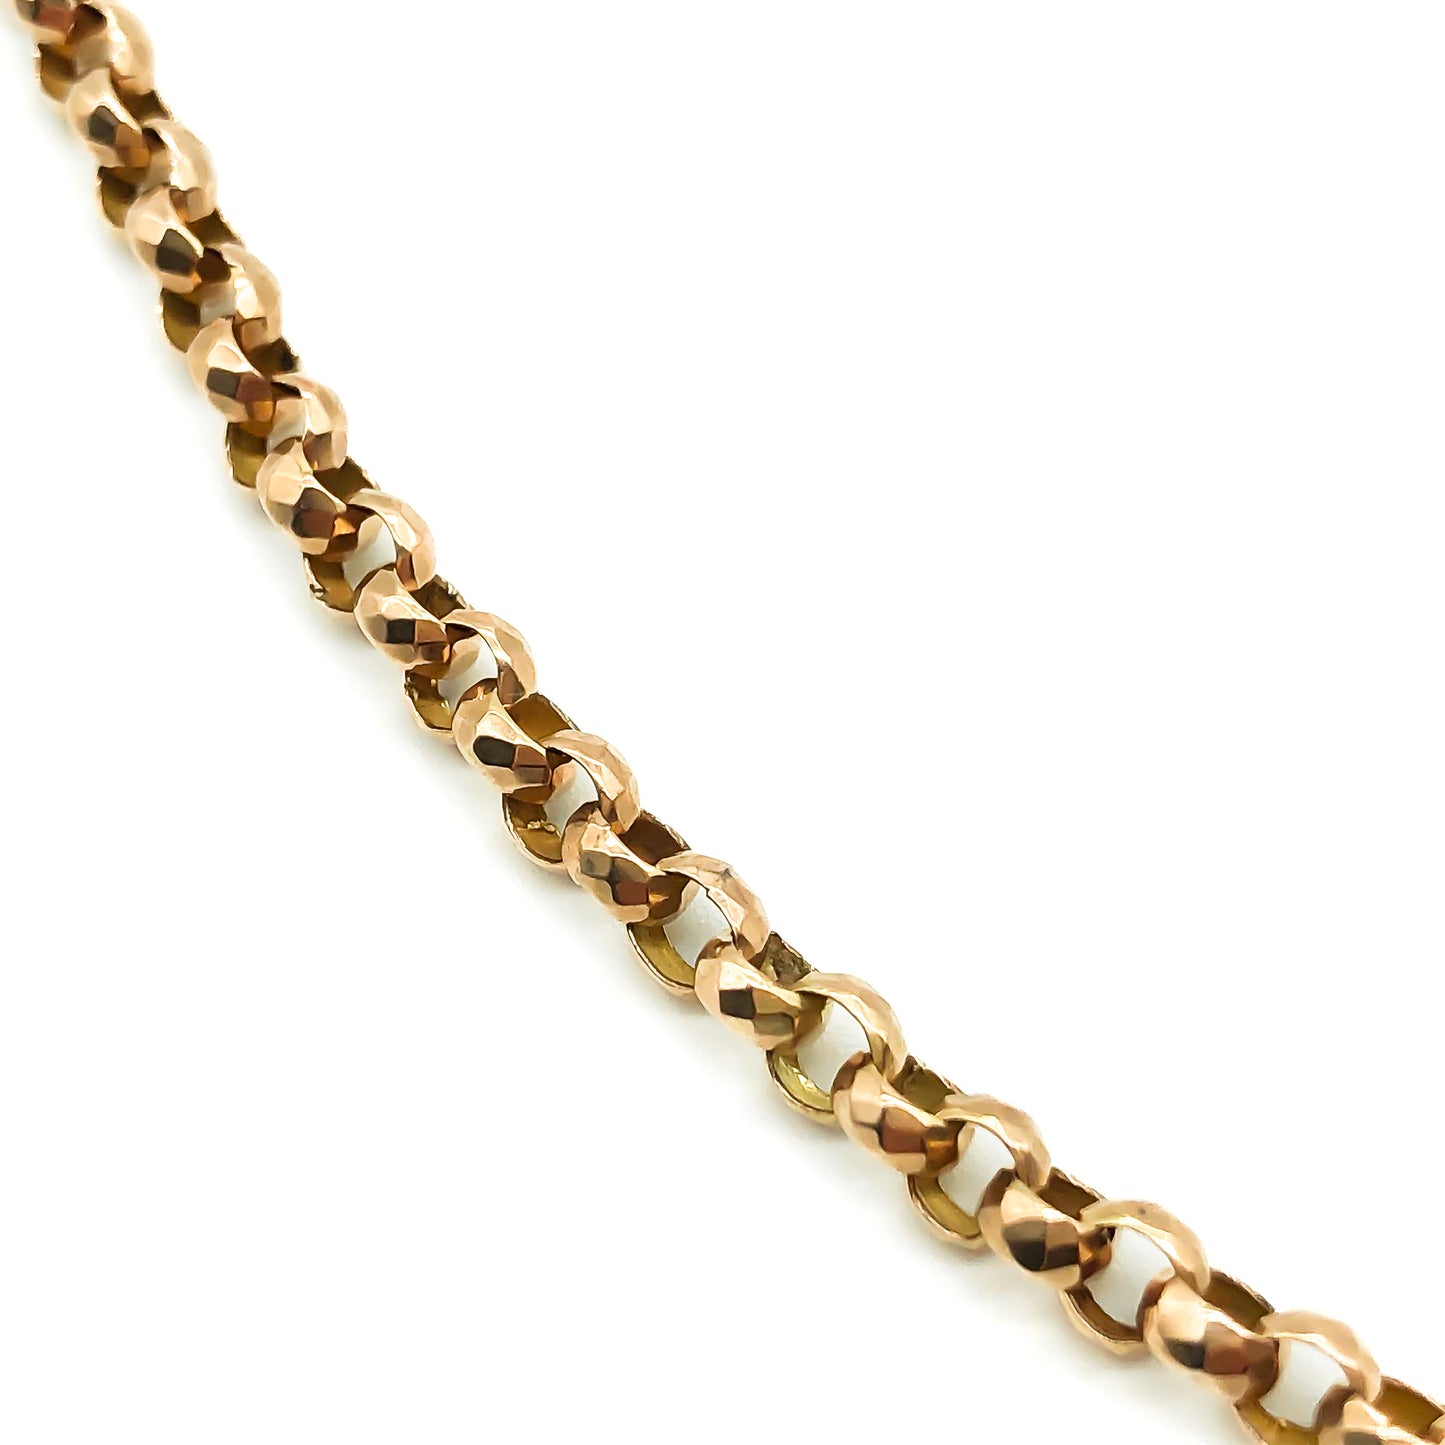 Stunning 9ct rose gold Edwardian curb link long guard chain. Long enough to be worn as a single, double or triple strand necklace.